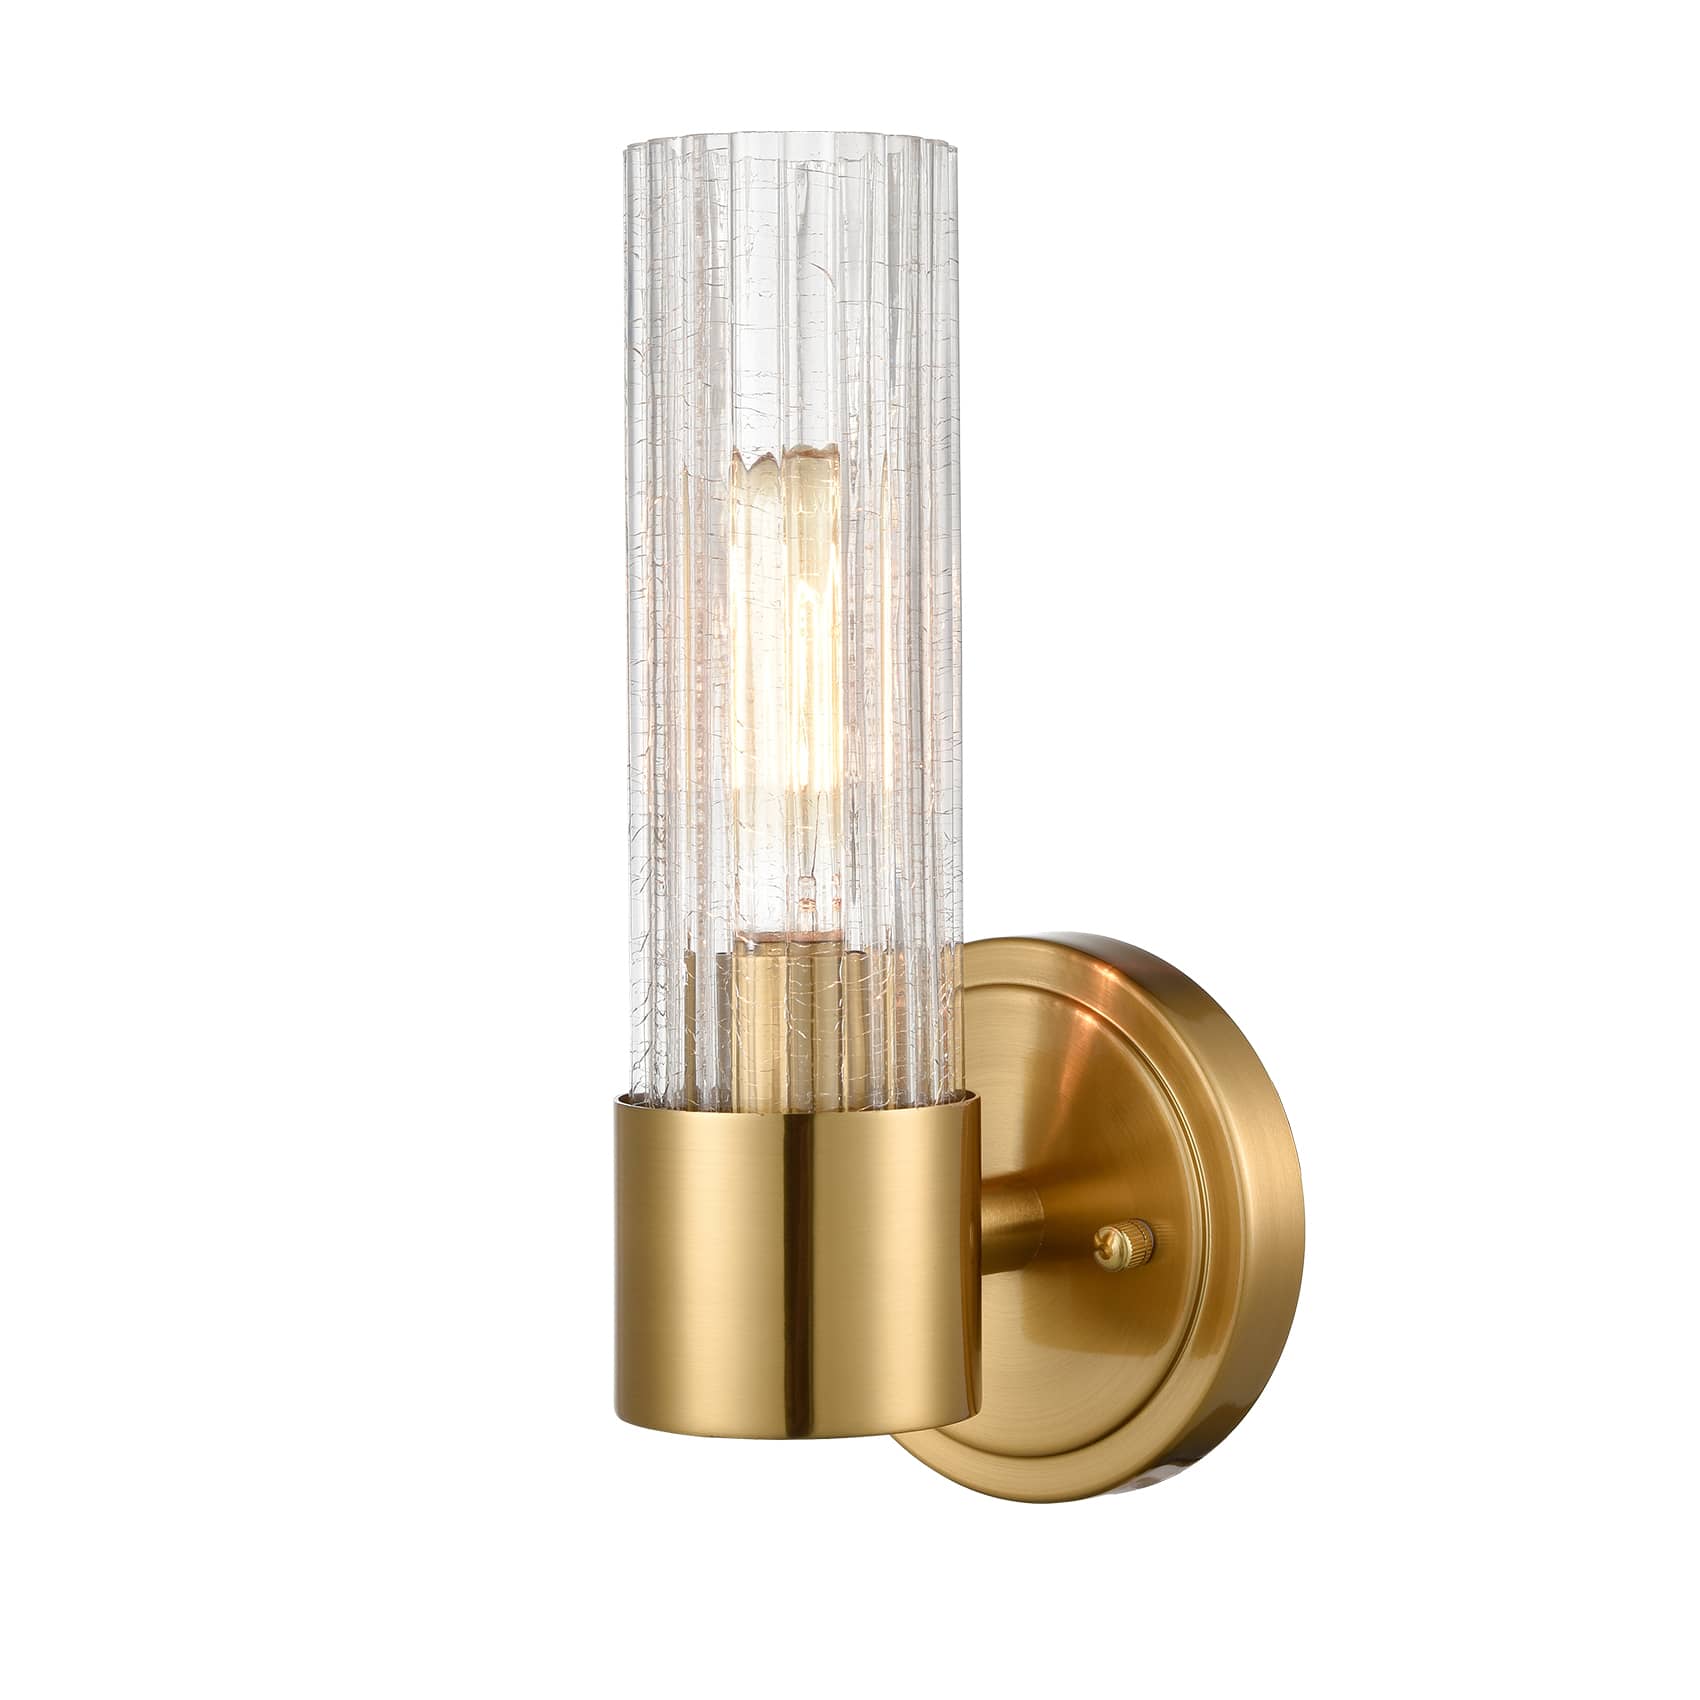 Stylish and durable Solid <a href='/brass-wall-light/'>Brass Wall Light</a> with Frosted Glass for Coastal Areas